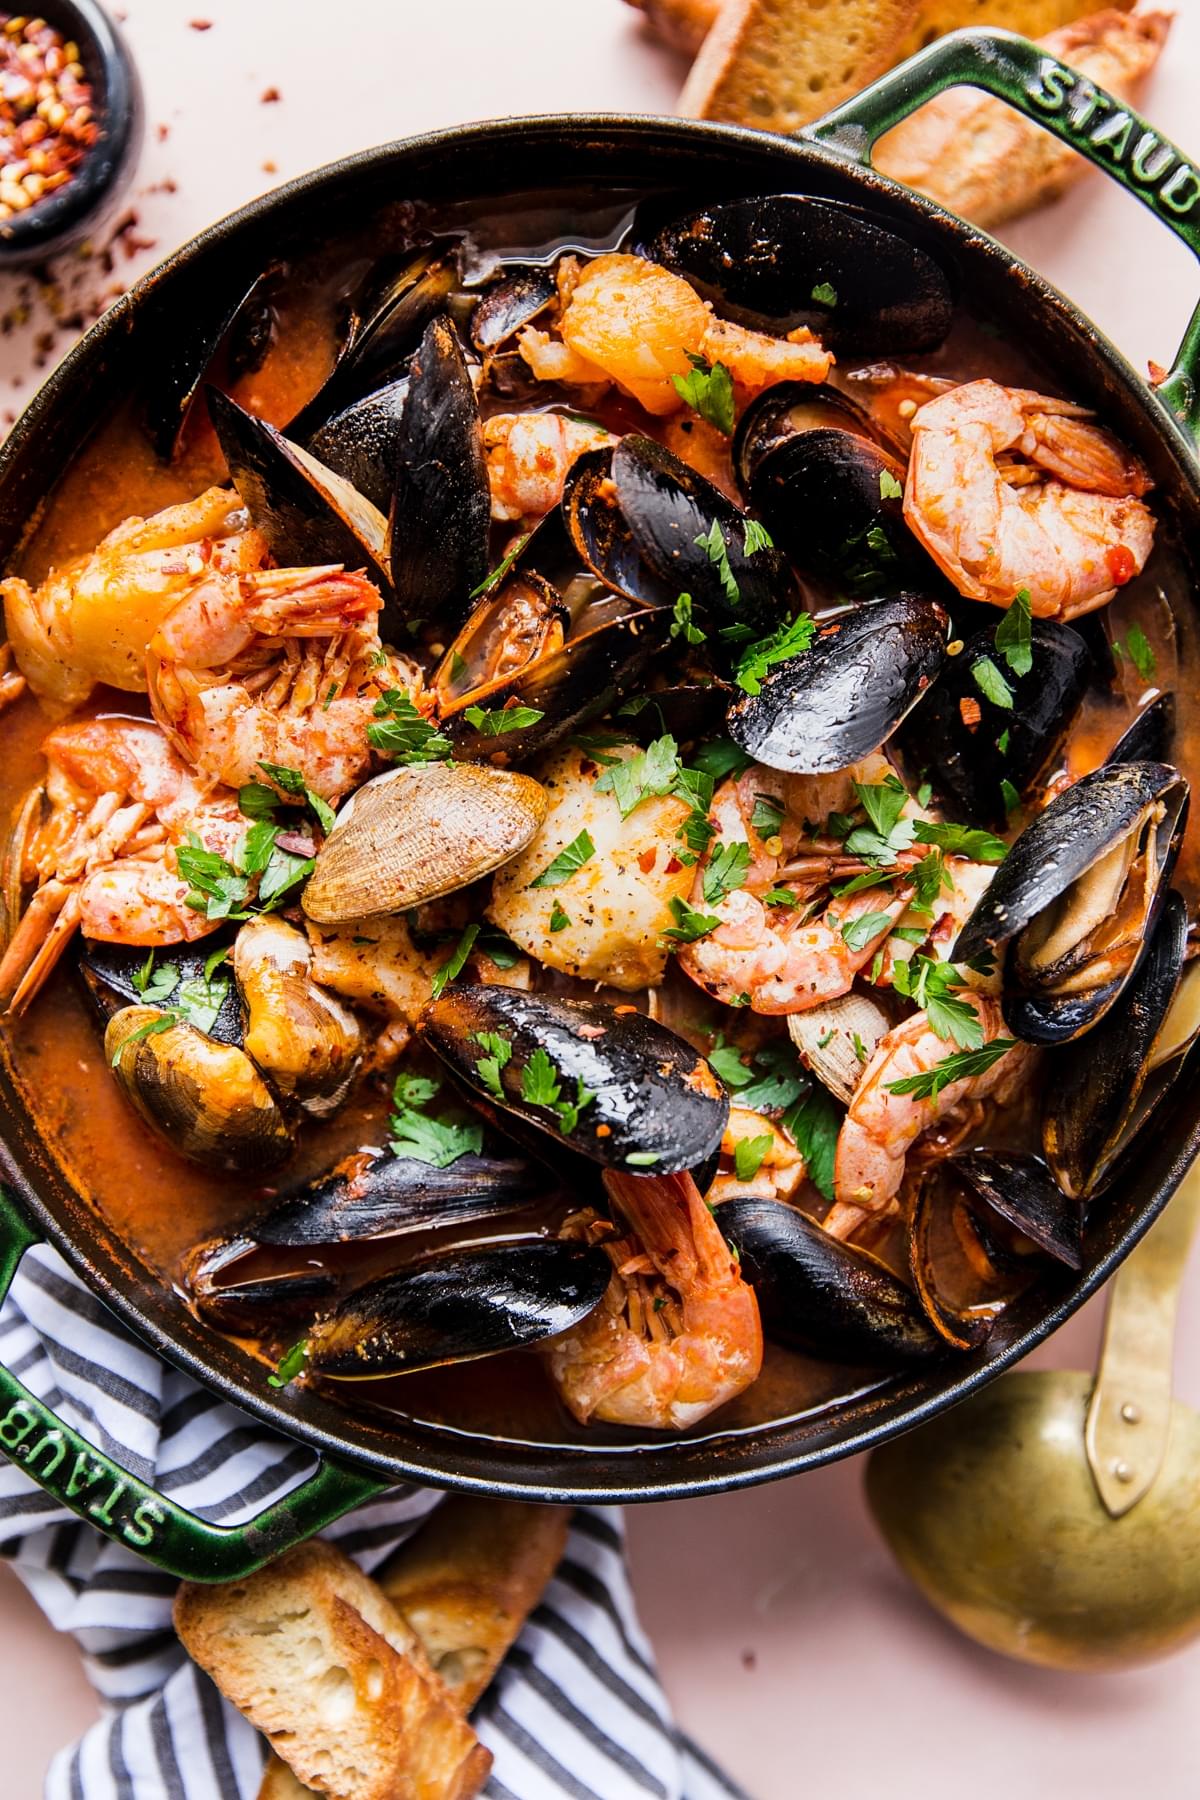 Copping with muscles, clams, shrimp, parsley in a pot